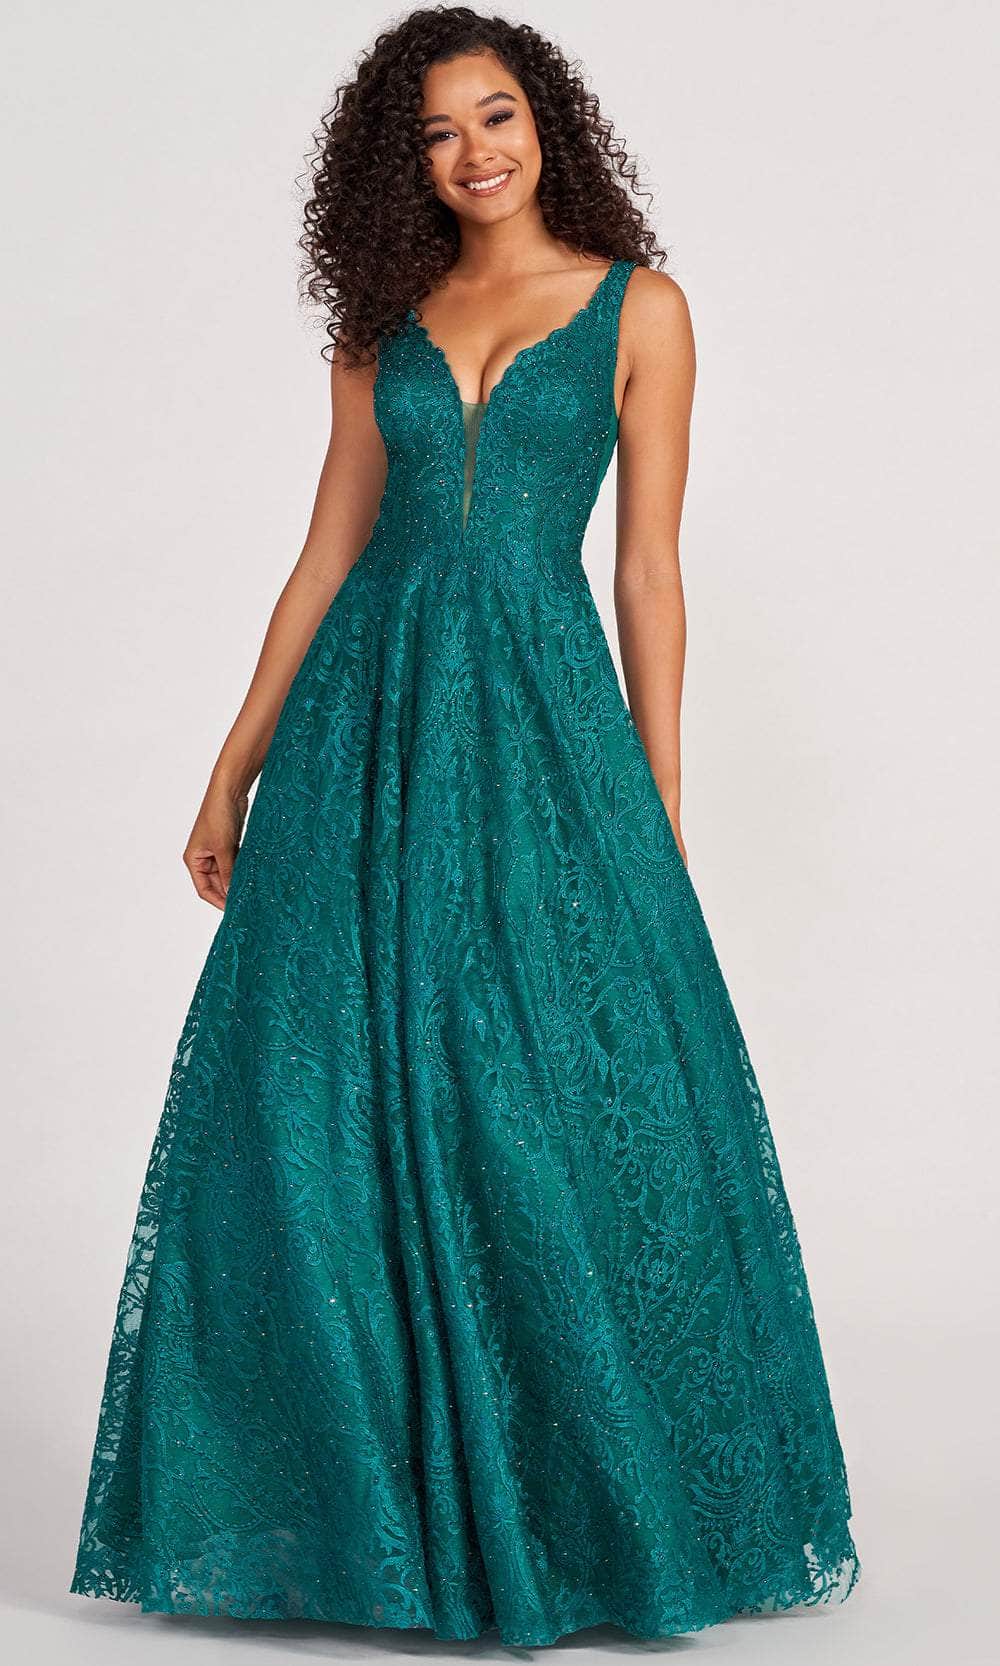 Colette for Mon Cheri CL2029 - Lace Embroidered A-Line Prom Gown Prom Dresses 00 / Emerald